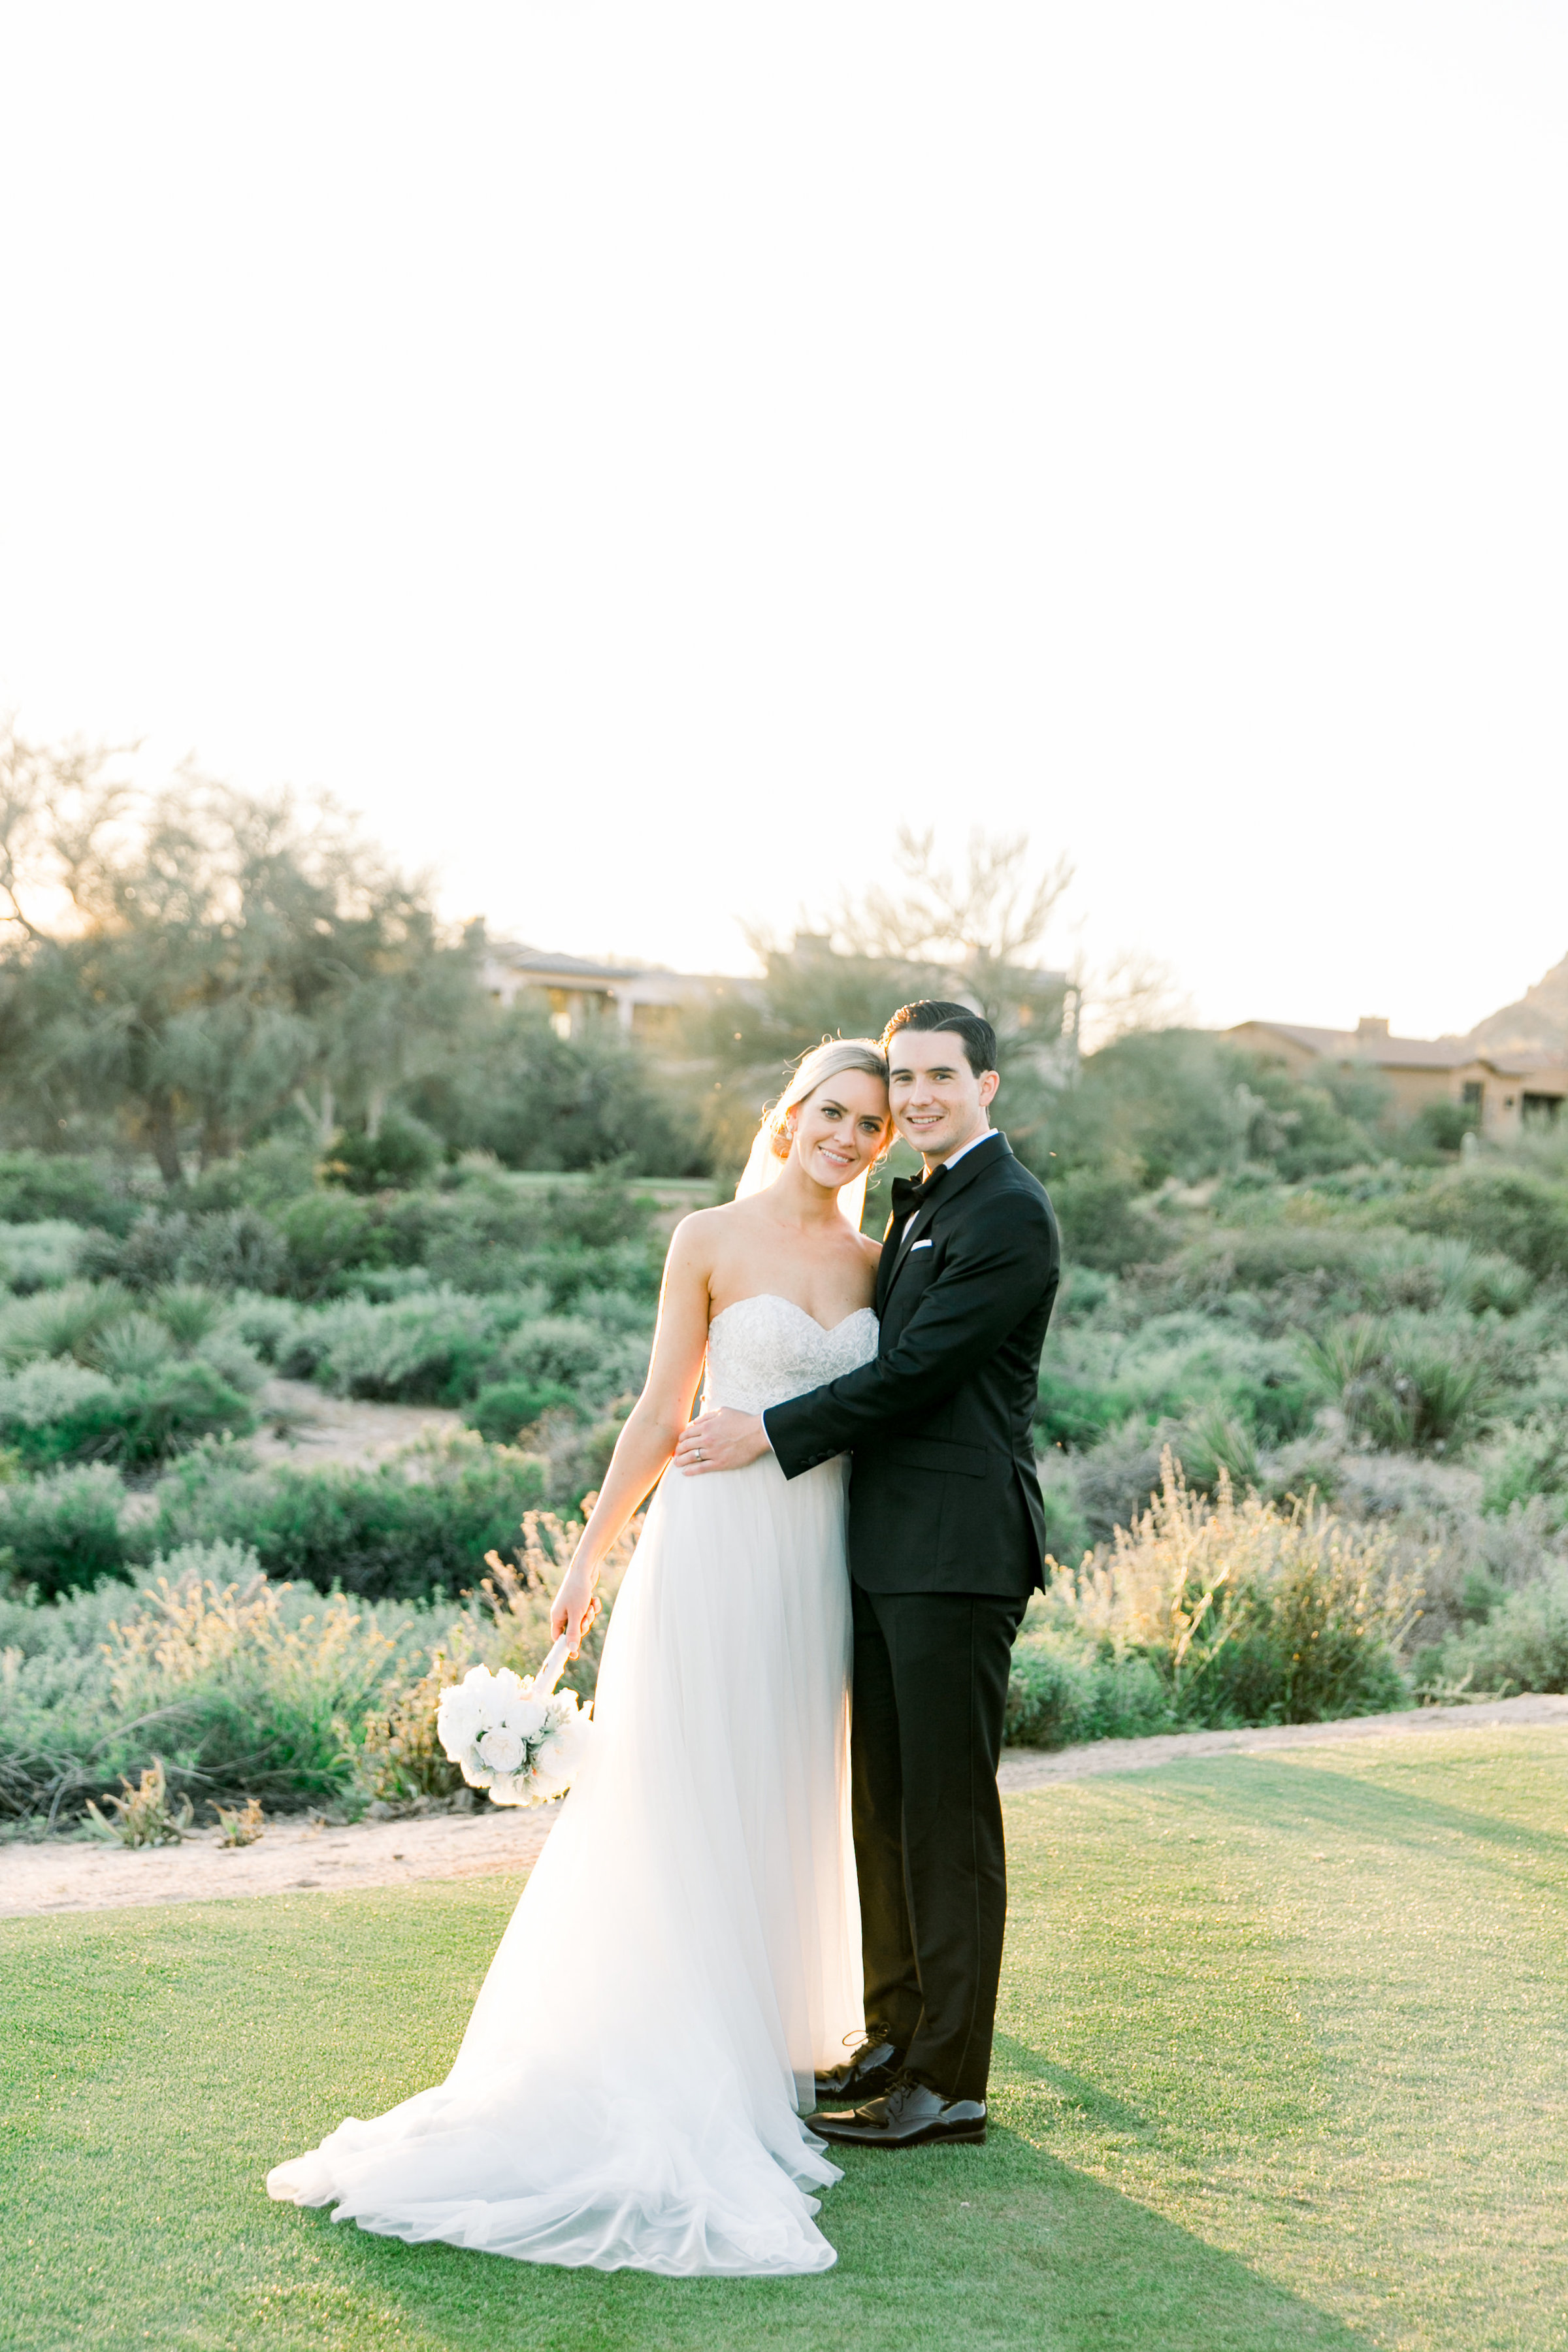 Karlie Colleen Photography - Arizona Wedding at The Troon Scottsdale Country Club - Paige & Shane -676